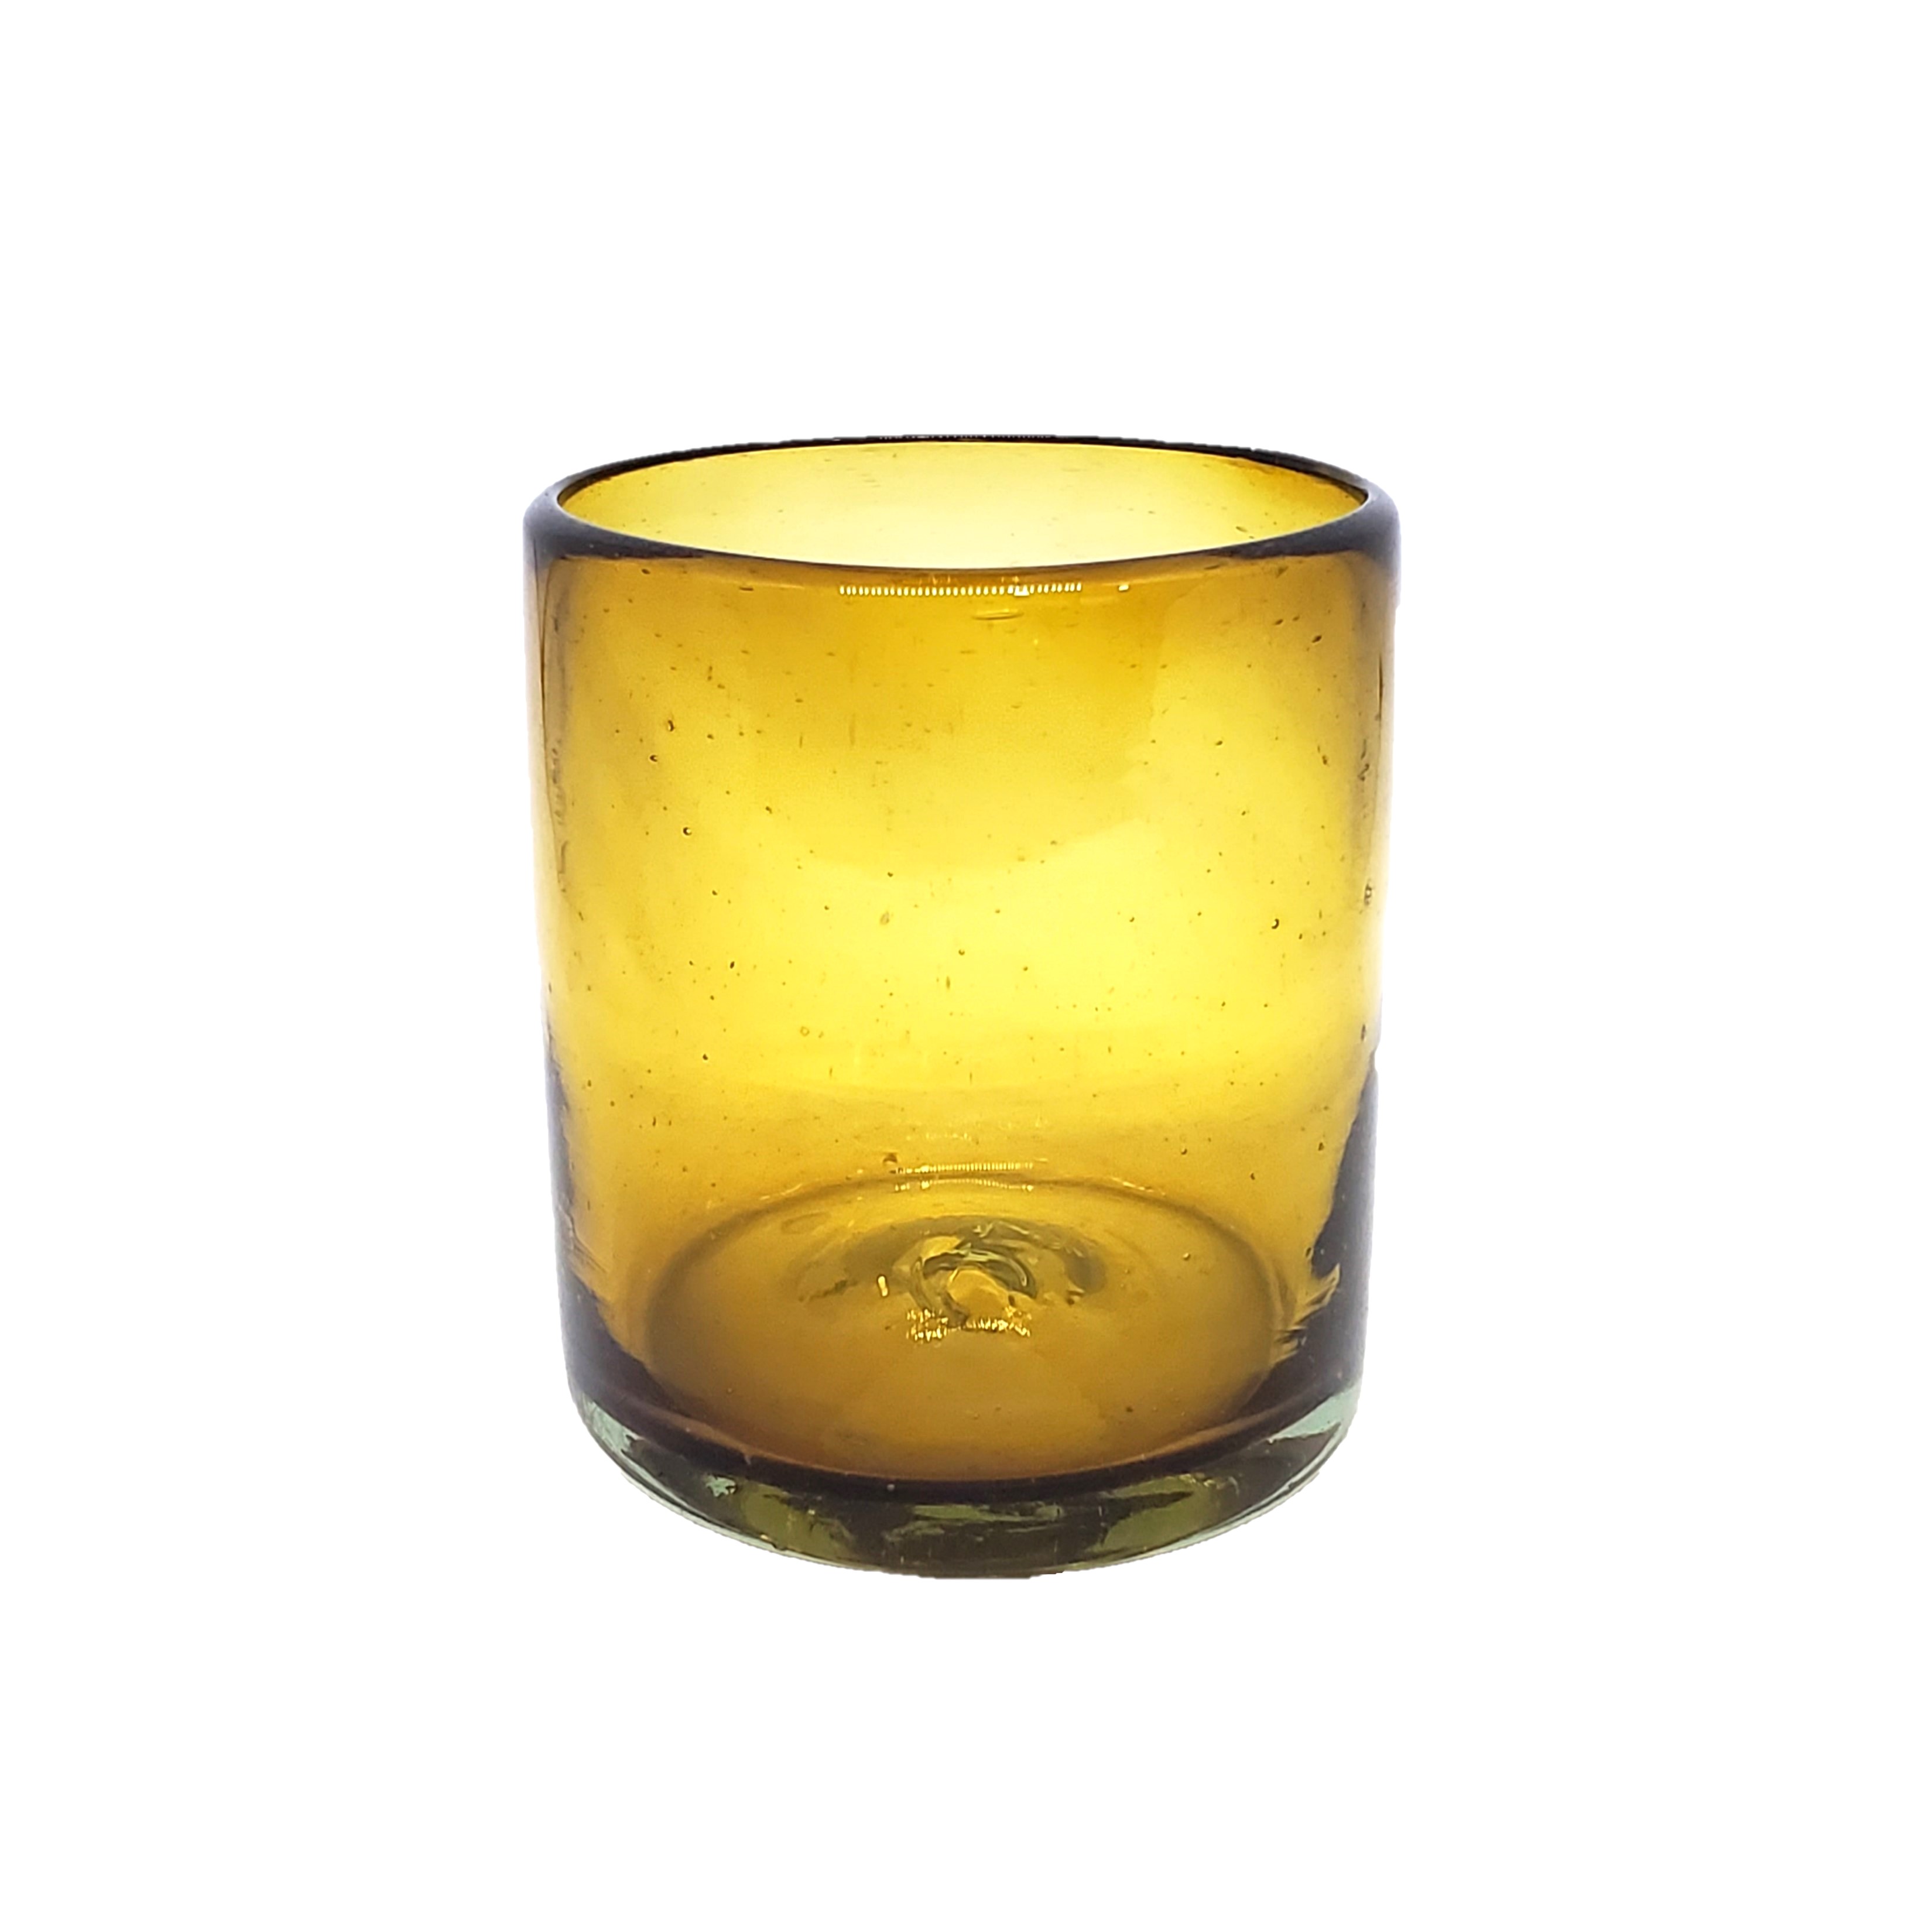 Colored Glassware / Solid Amber 9 oz Short Tumblers (set of 6) / Enhance your favorite drink with these colorful handcrafted glasses.